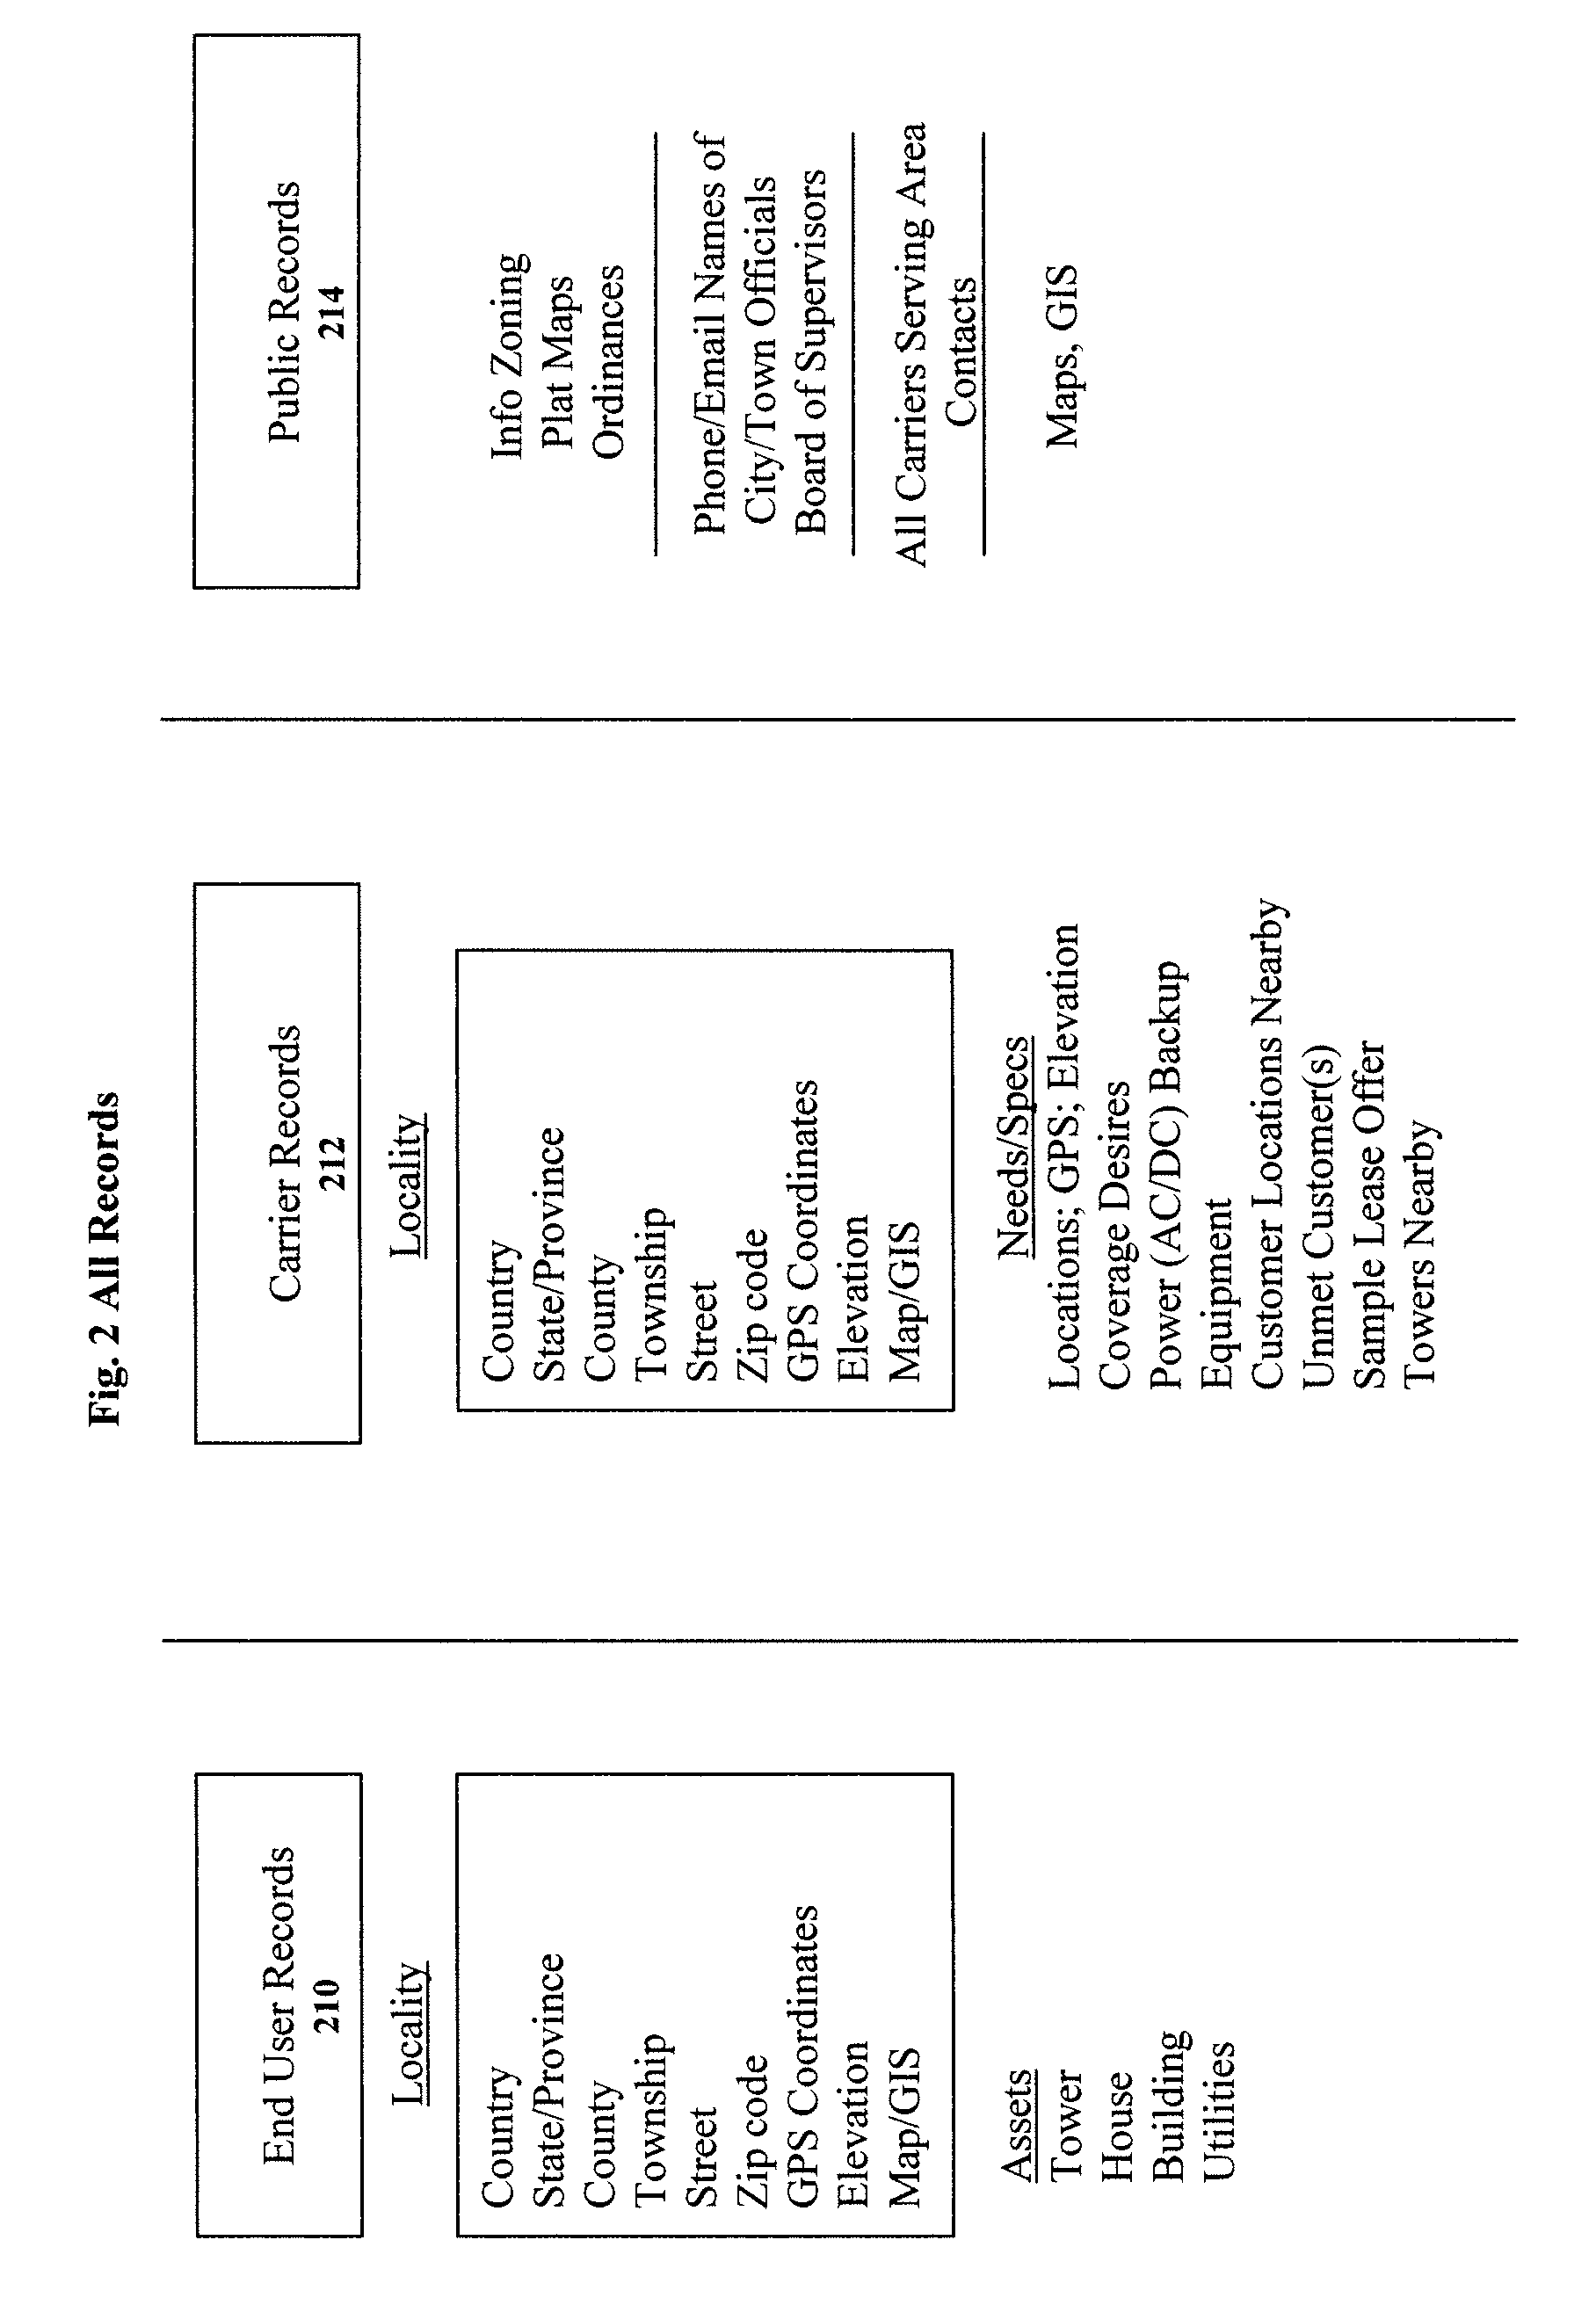 Clearinghouse system, method, and process for inventorying and acquiring infrastructure, monitoring and controlling network performance for enhancement, and providing localized content in communication networks